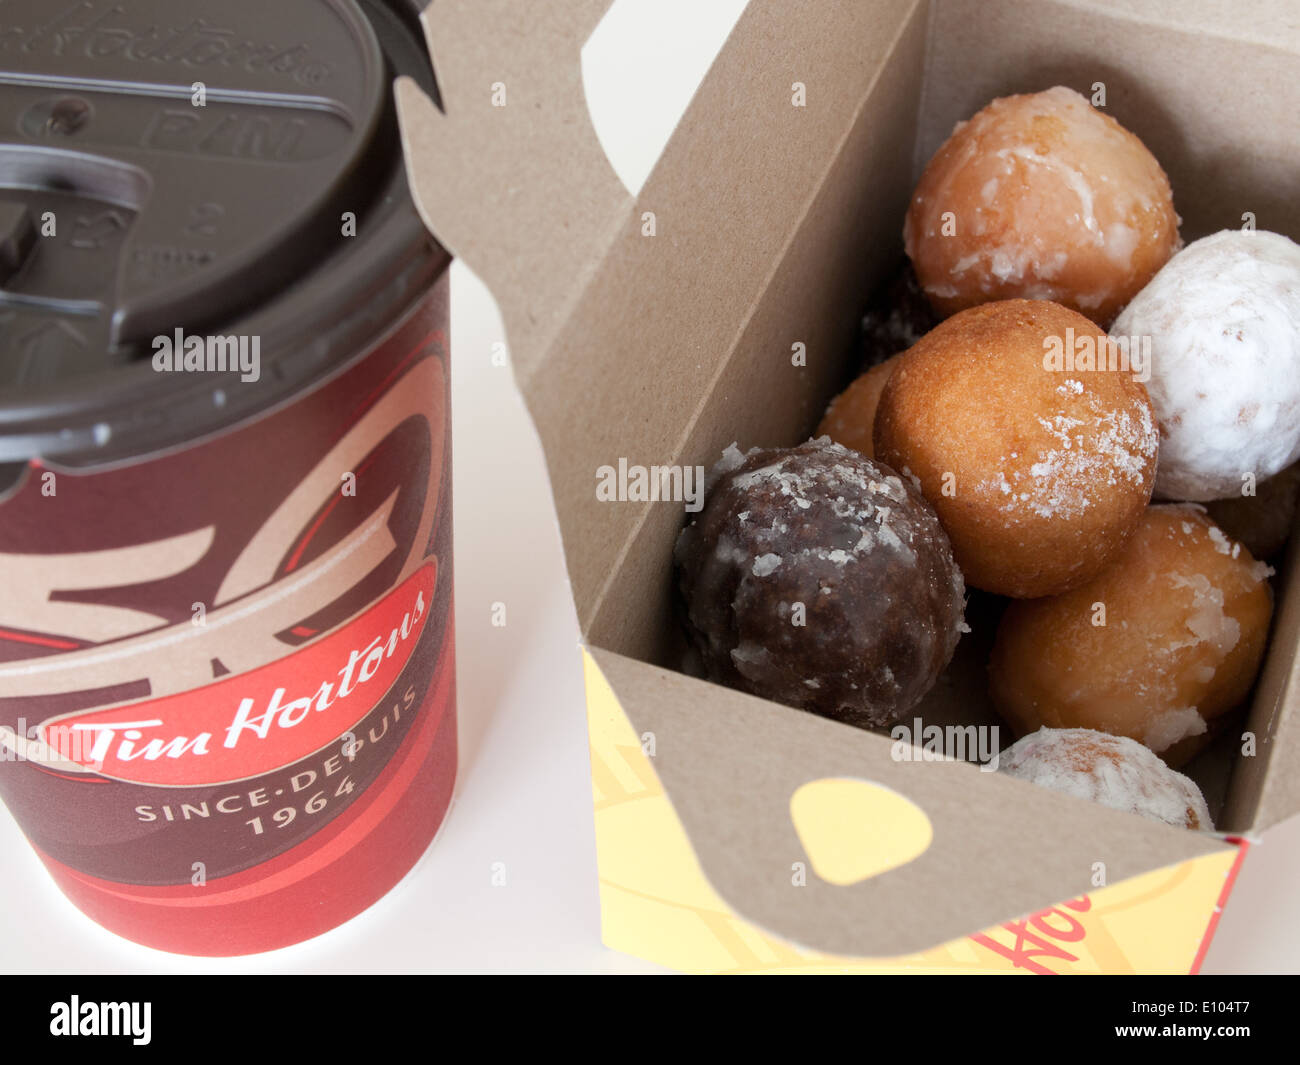 A Tim Hortons coffee cup and Timbits (doughnut holes, donut holes). Canada. Stock Photo